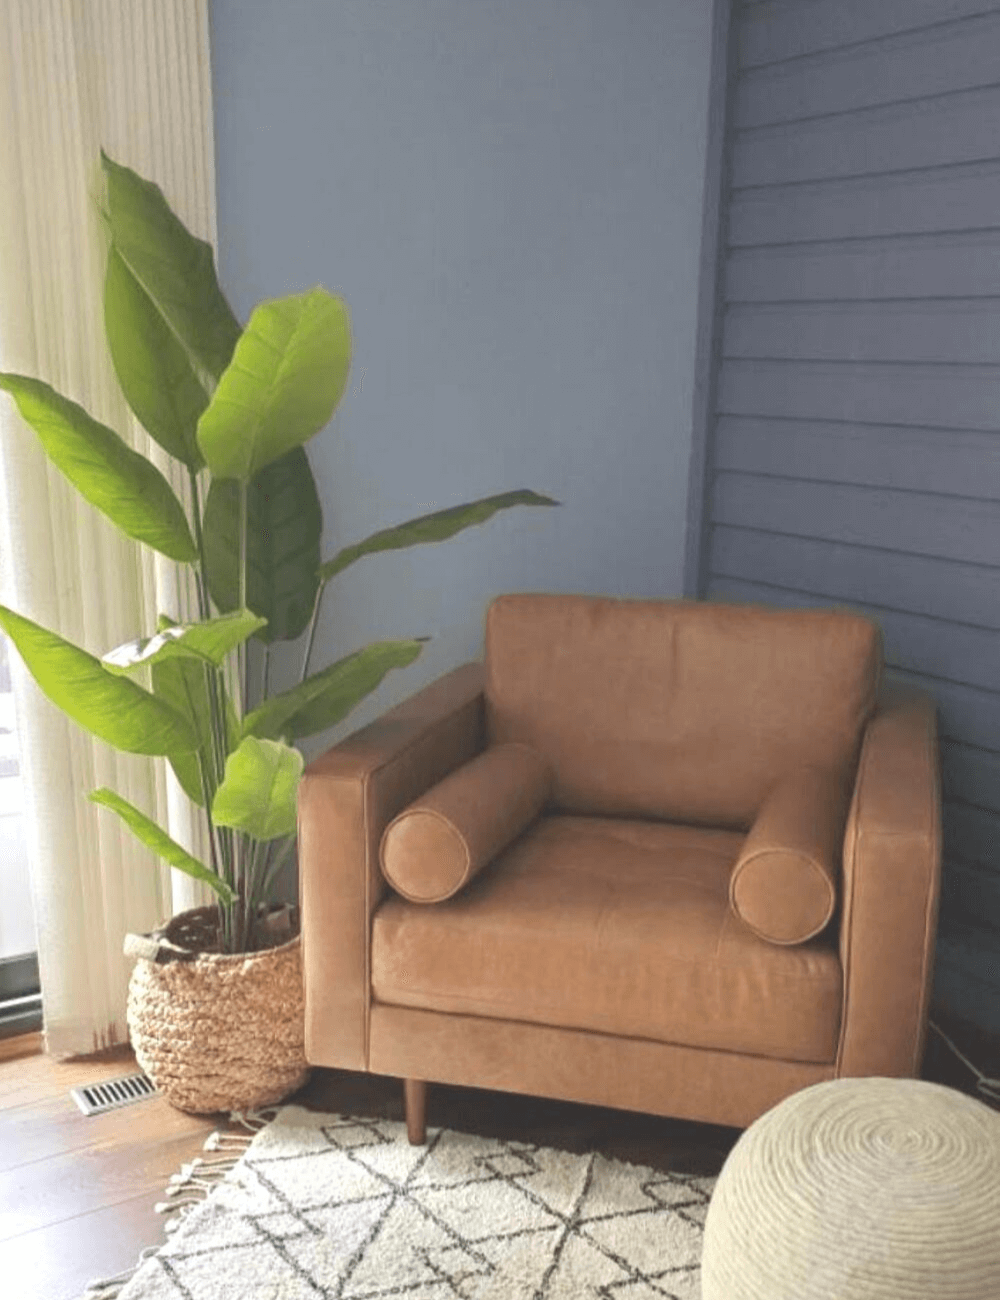 How to make your artificial plants to look more realistic | Artiplanto